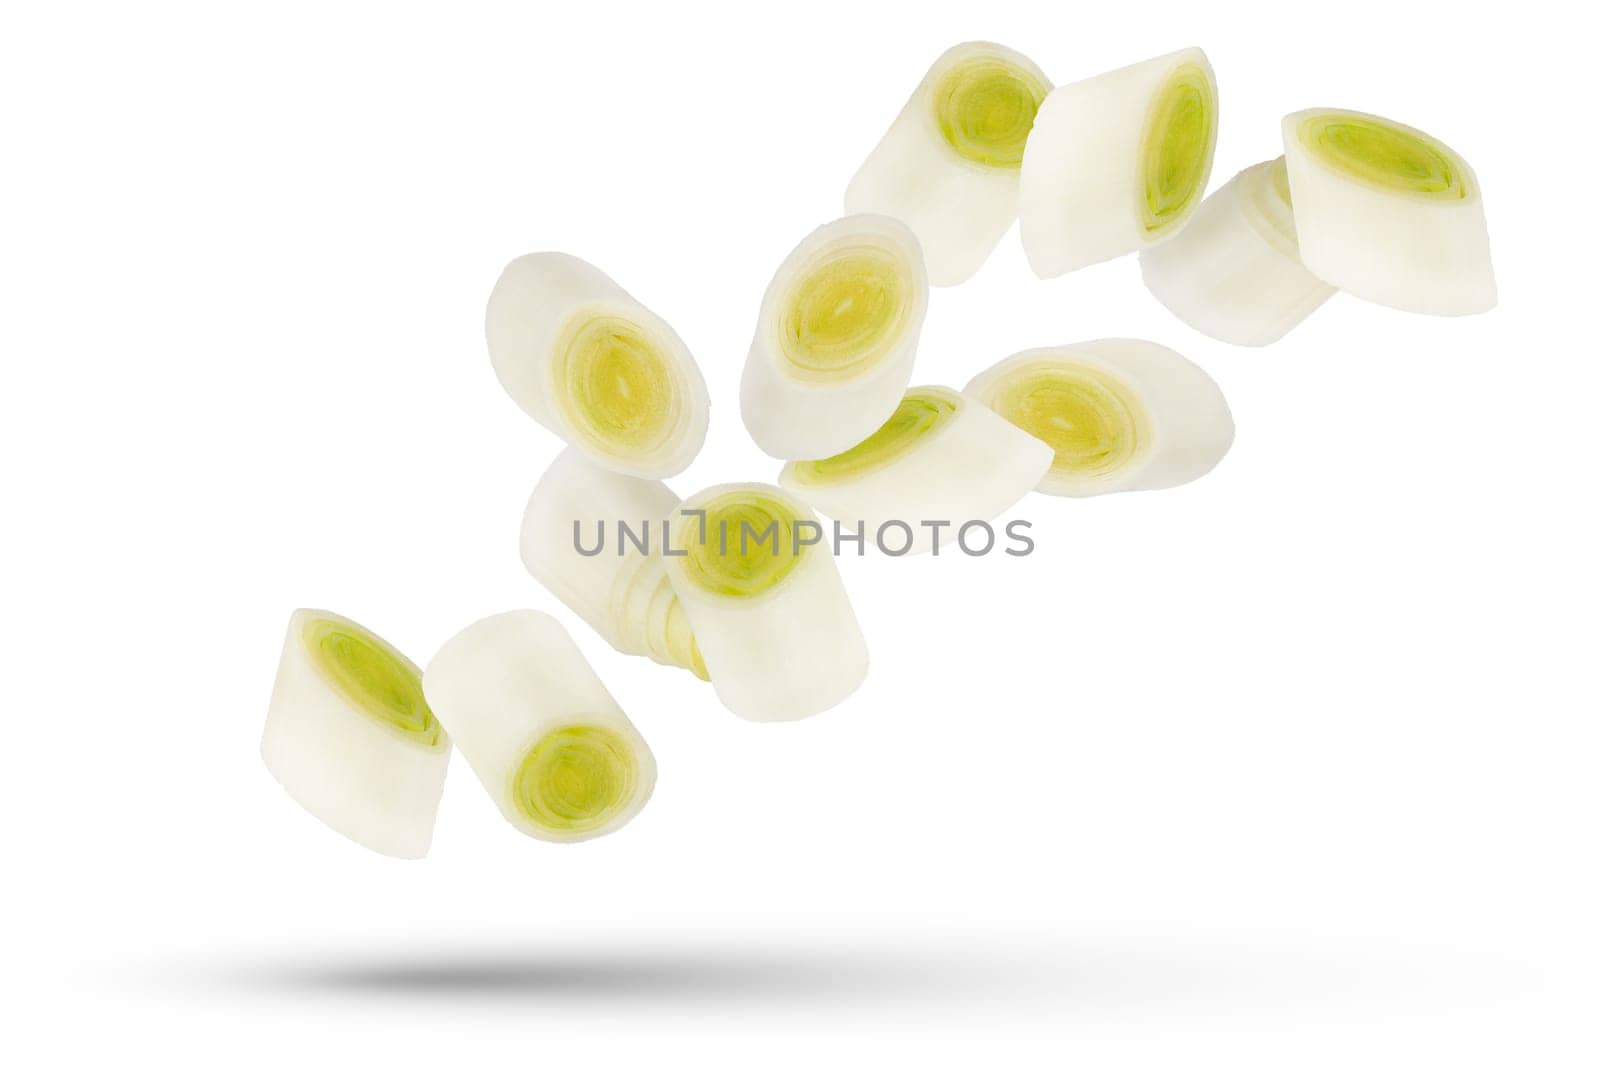 Leek slices. White and green onion slices isolated on white background. A group of leek slices of different sizes and shapes scatter in different directions. by SERSOL